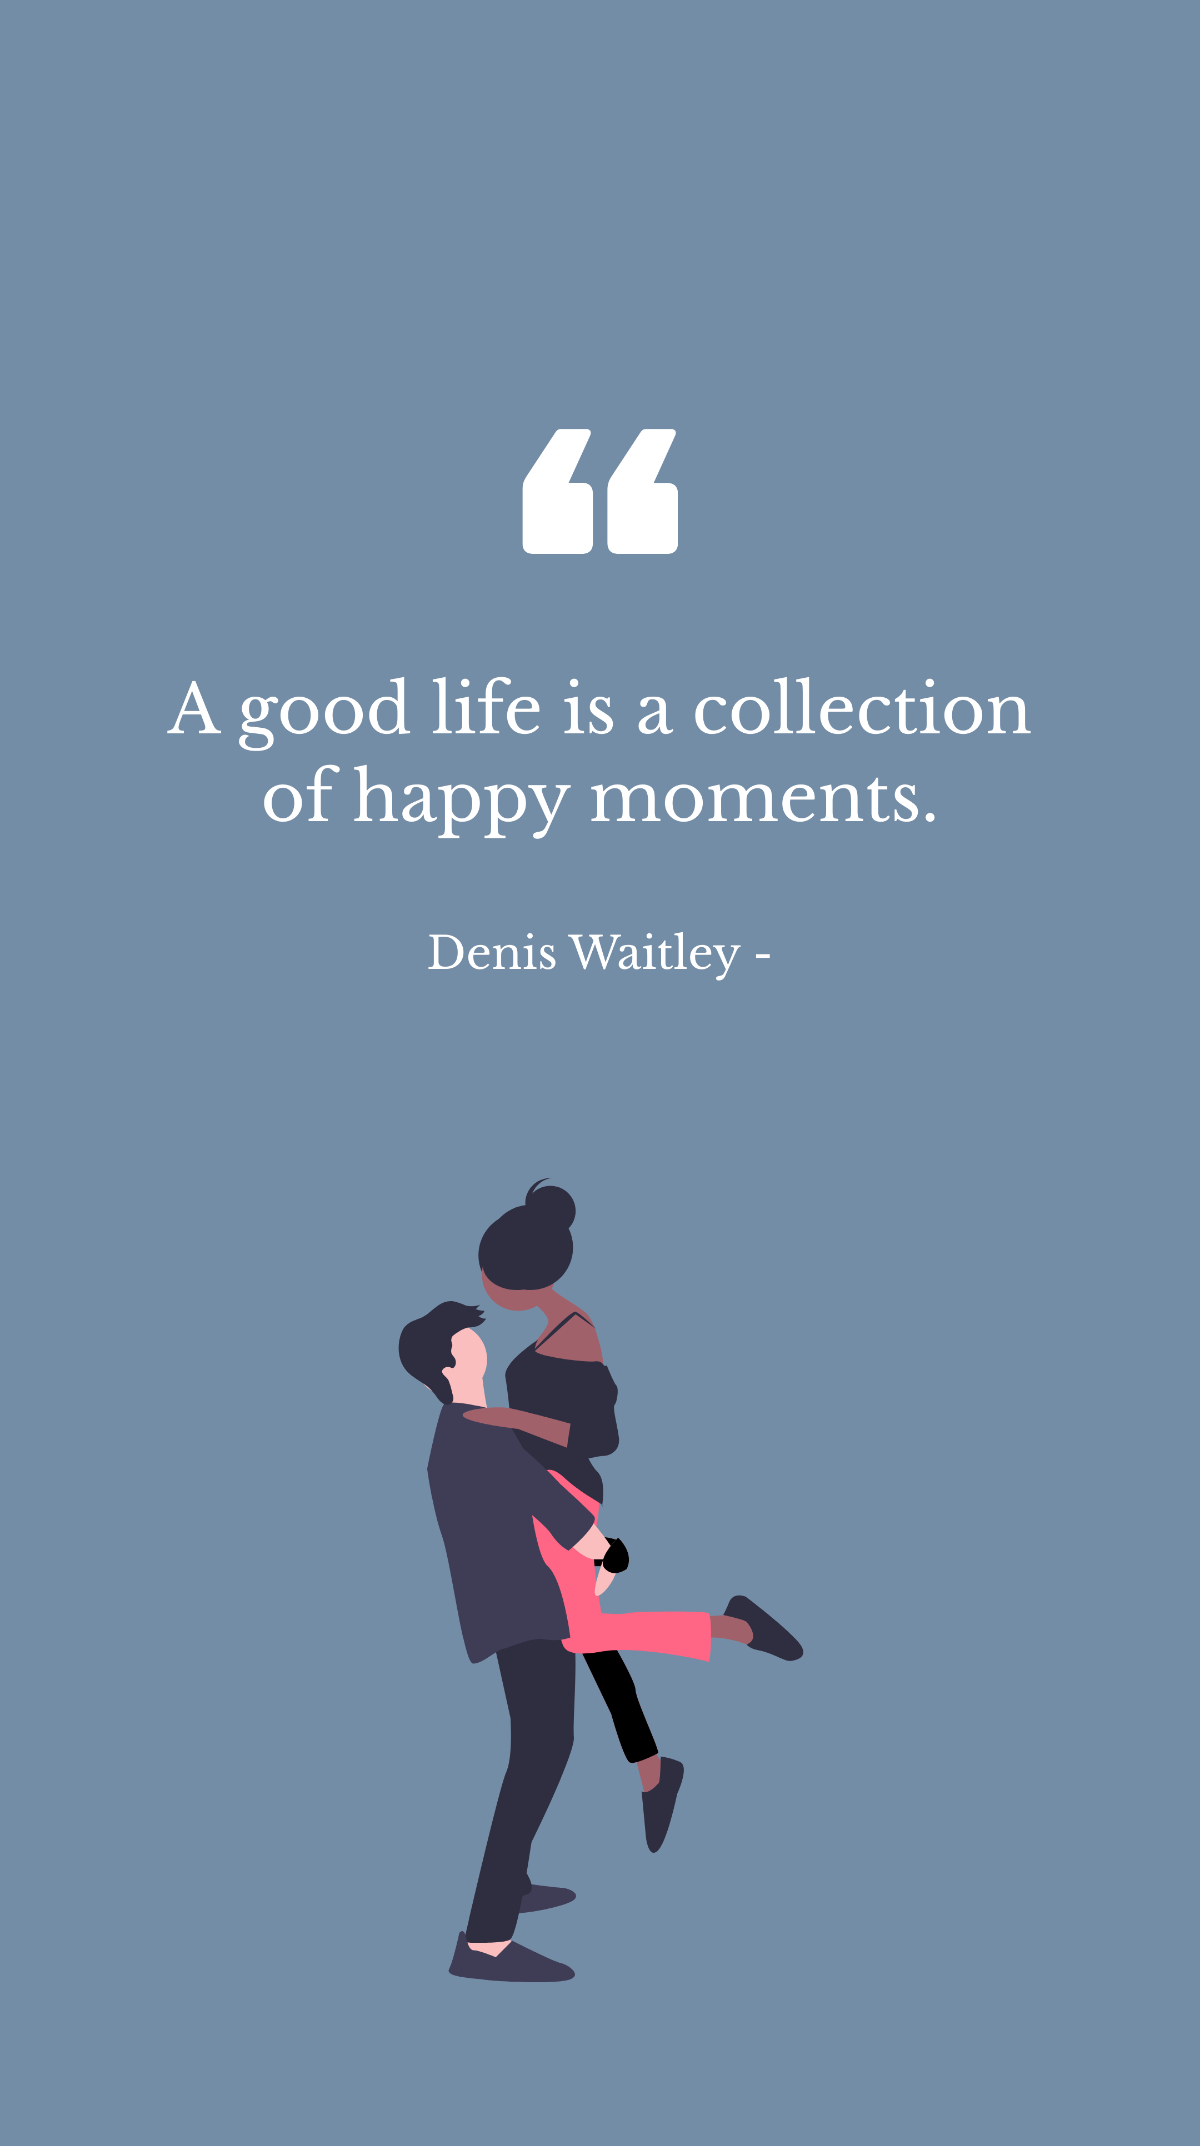 Free Denis Waitley - A good life is a collection of happy moments. Template